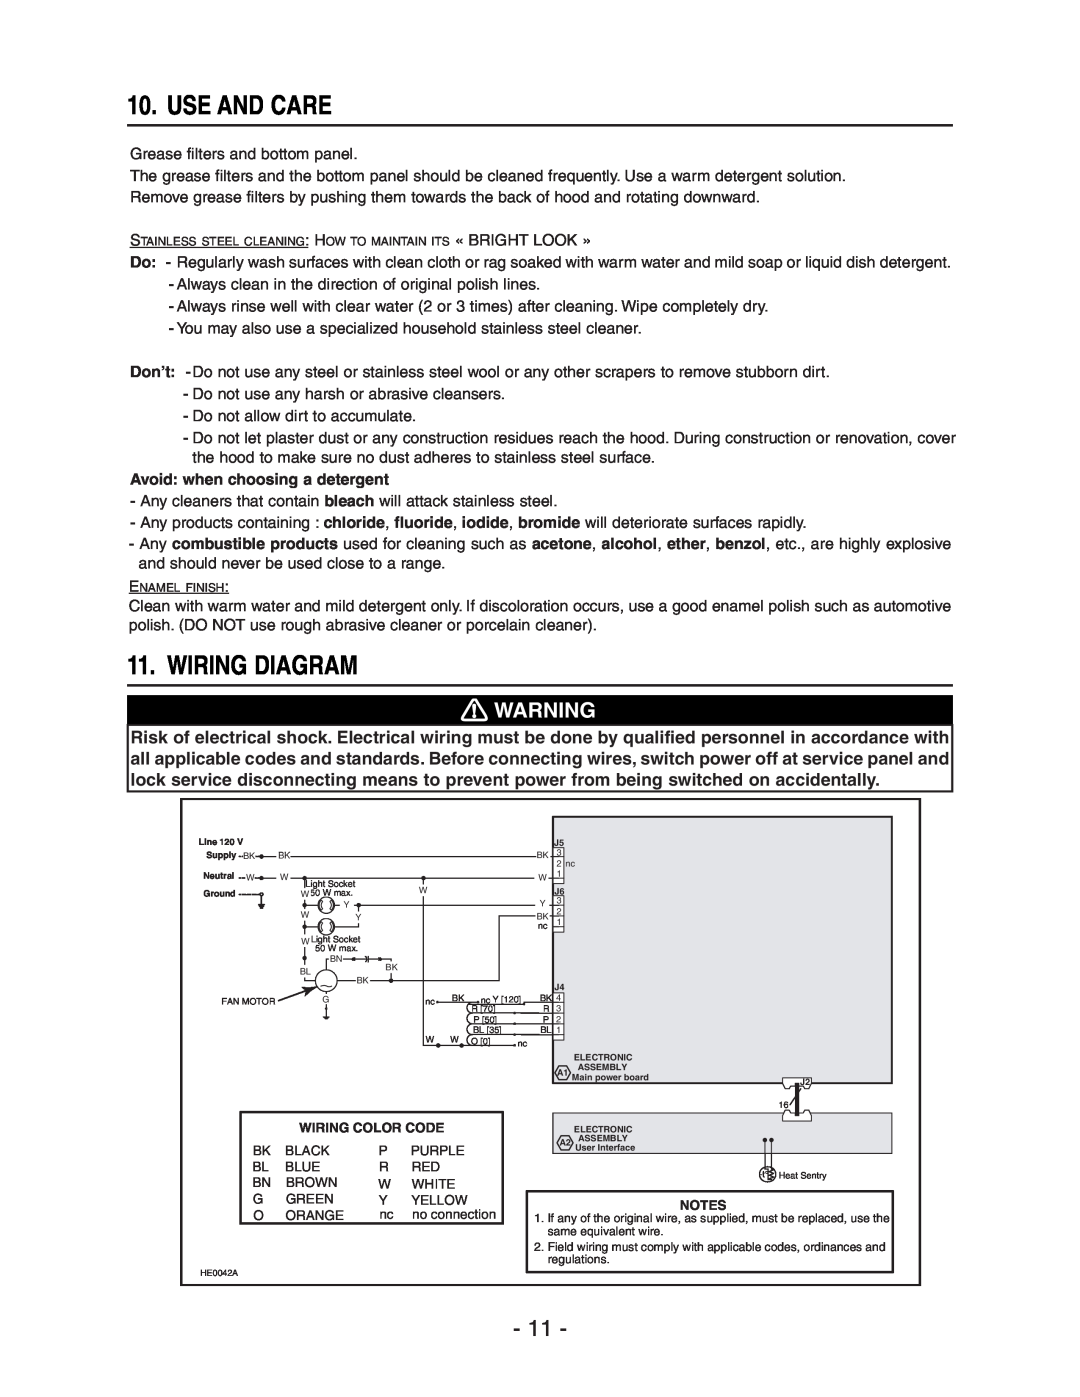 Broan E661 manual Use And Care, Wiring Diagram, Avoid when choosing a detergent 